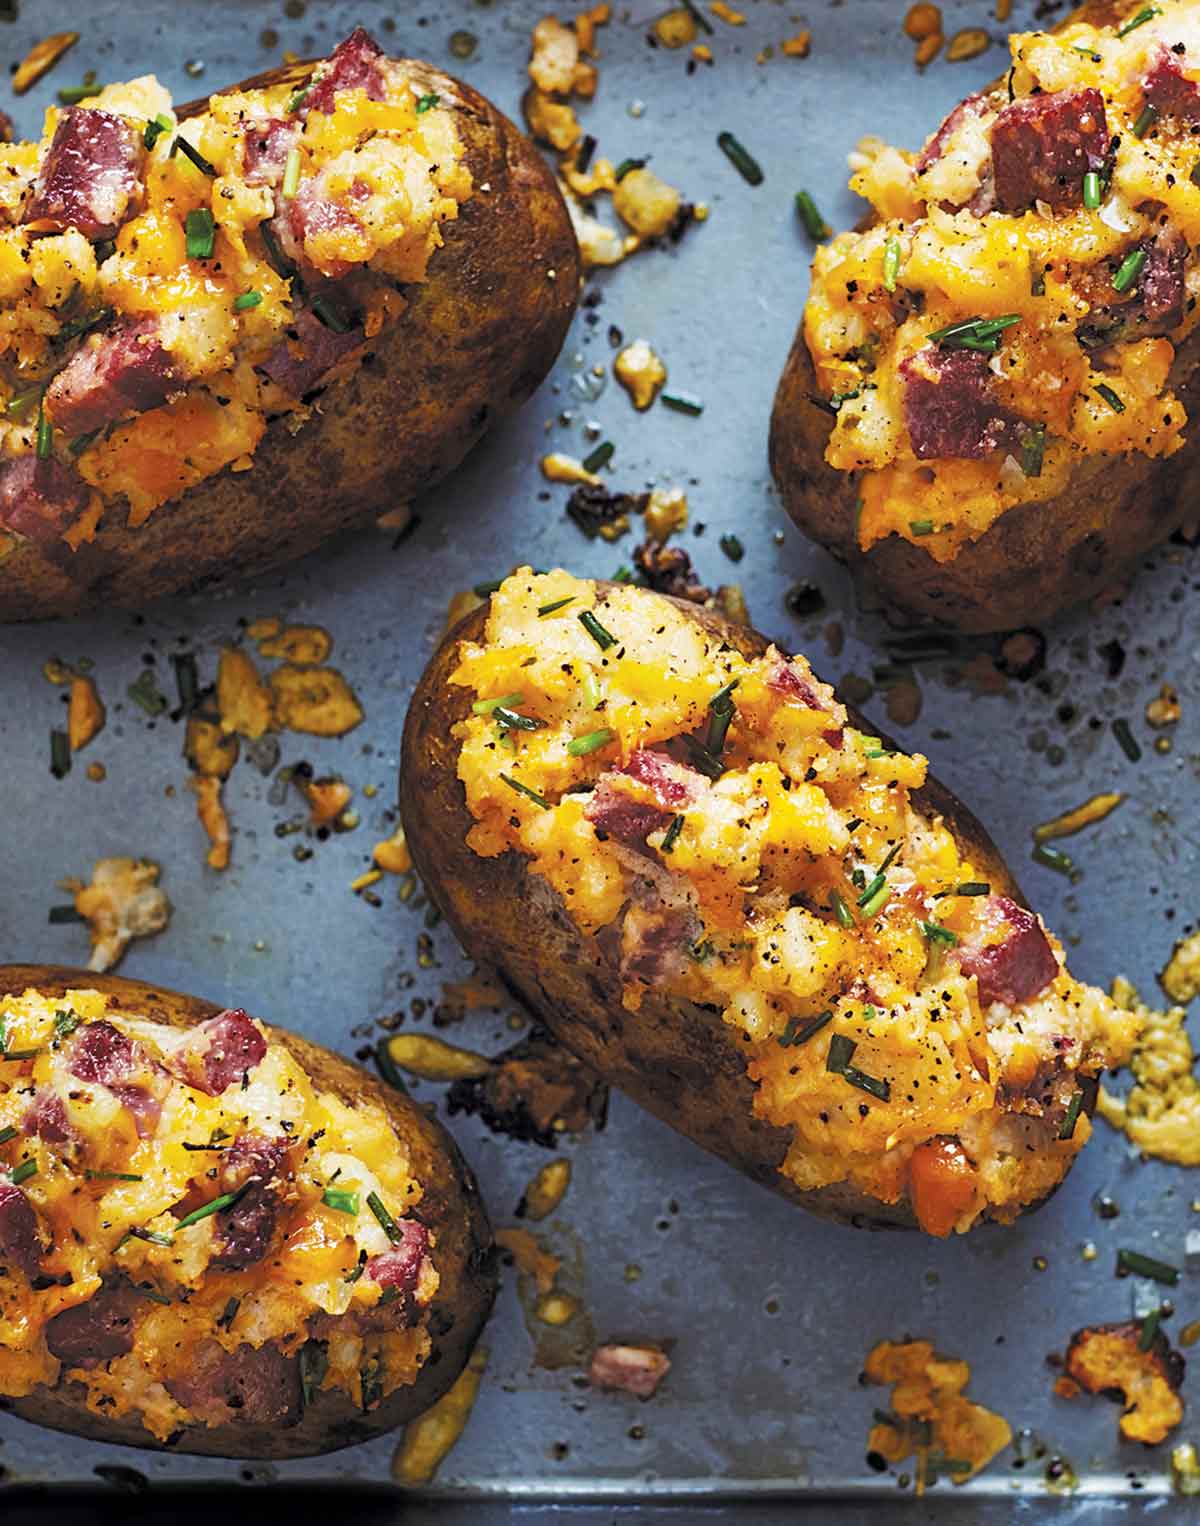 Four twice baked potatoes with corned beef on a baking sheet.